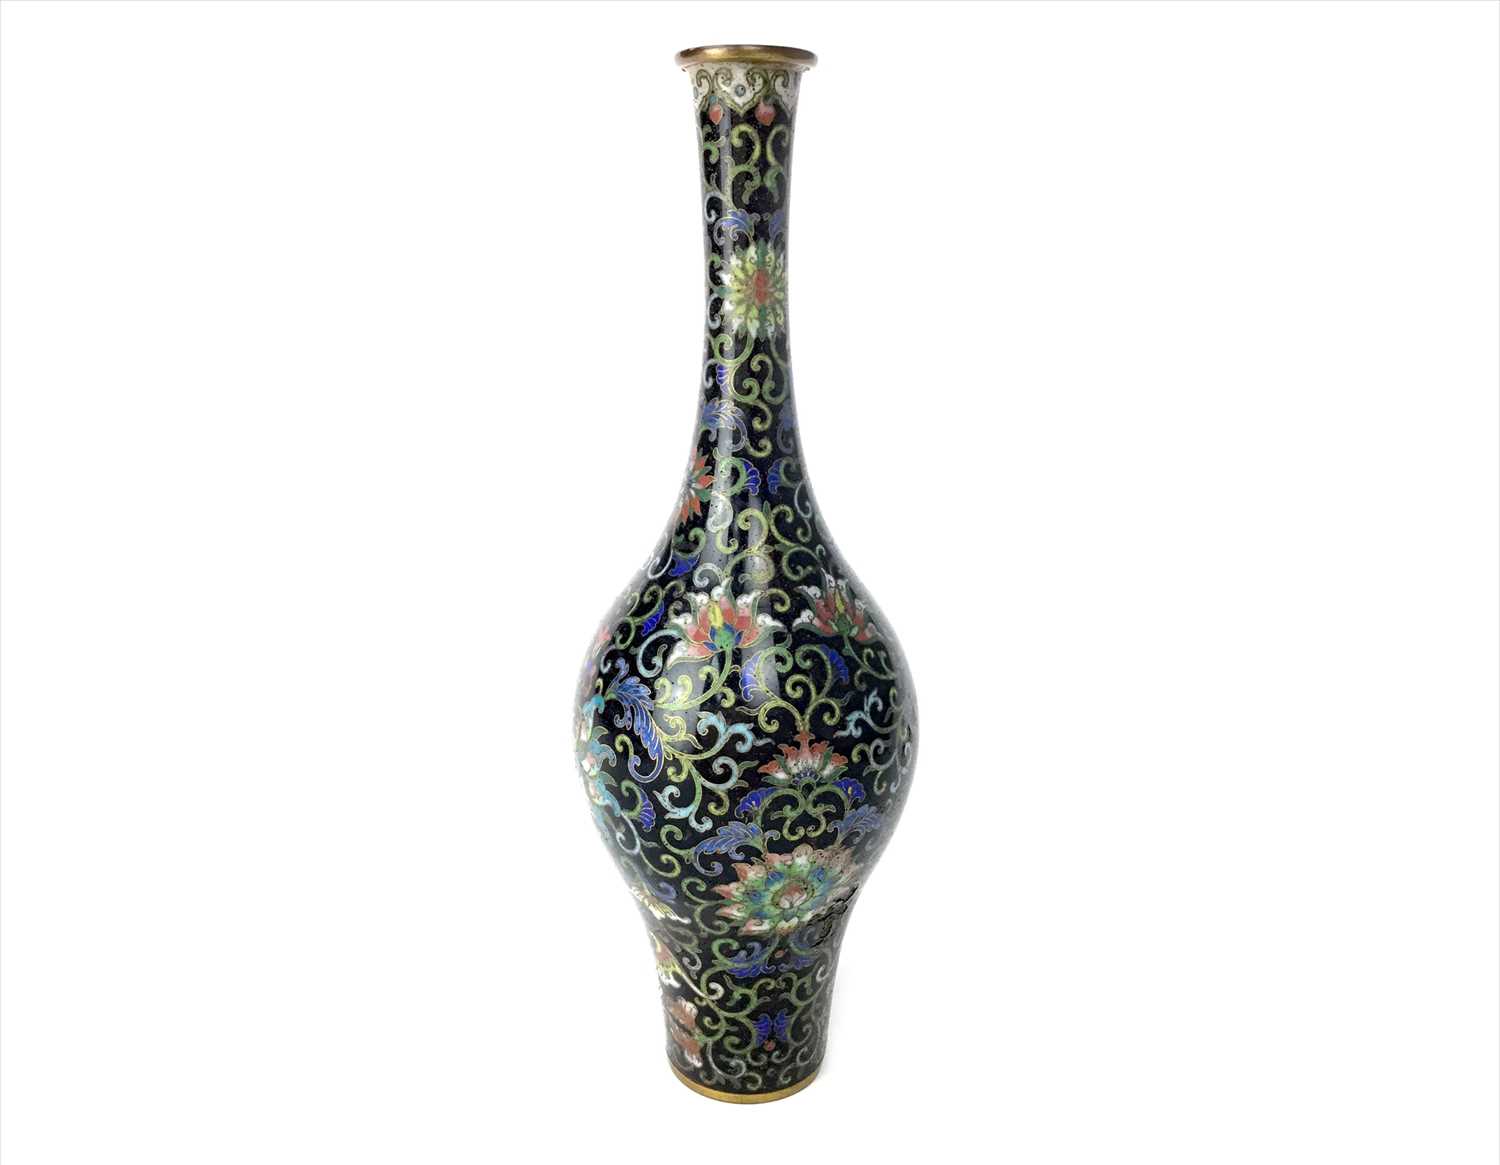 Lot 1151 - A LATE 19TH CENTURY CHINESE CLOISONNE VASE